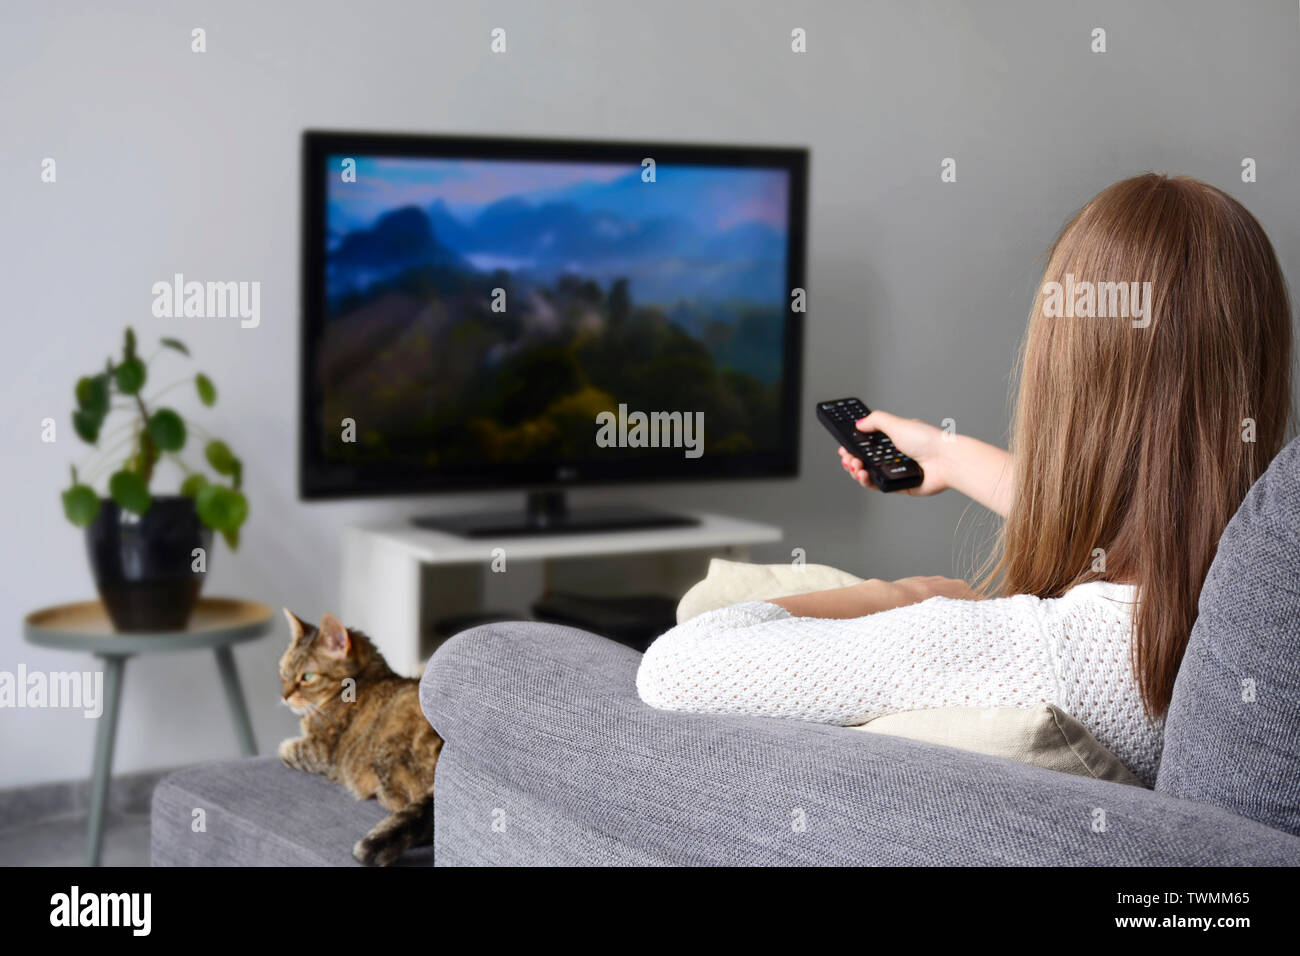 A young woman watching TV while sitting with her cat on sofa in living room. Nature, documentary, tv screen Stock Photo